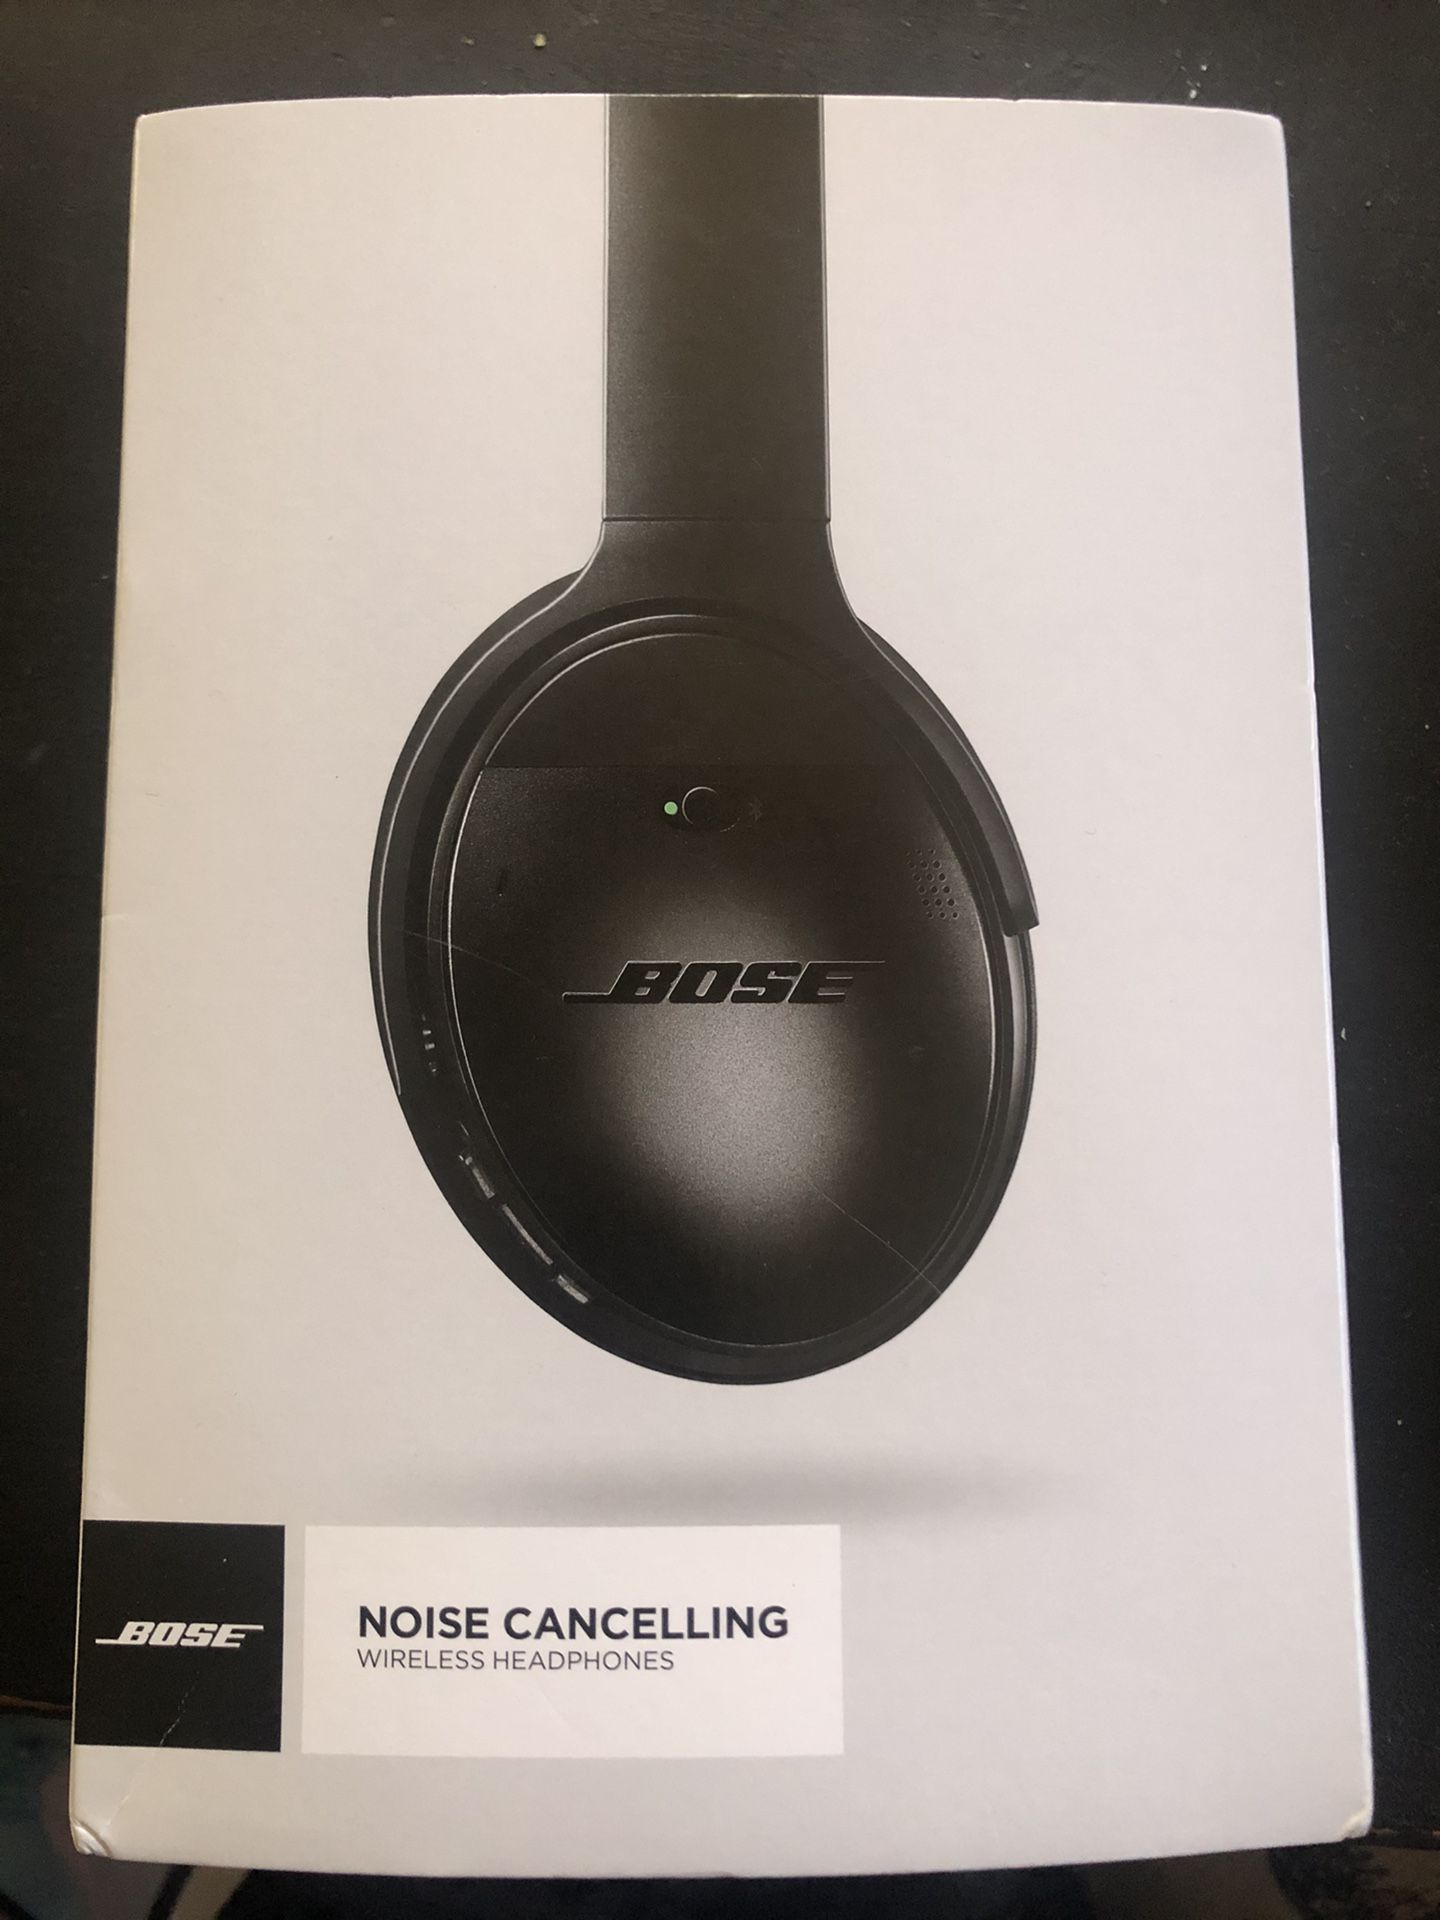 Bose noise cancelling wireless headphones